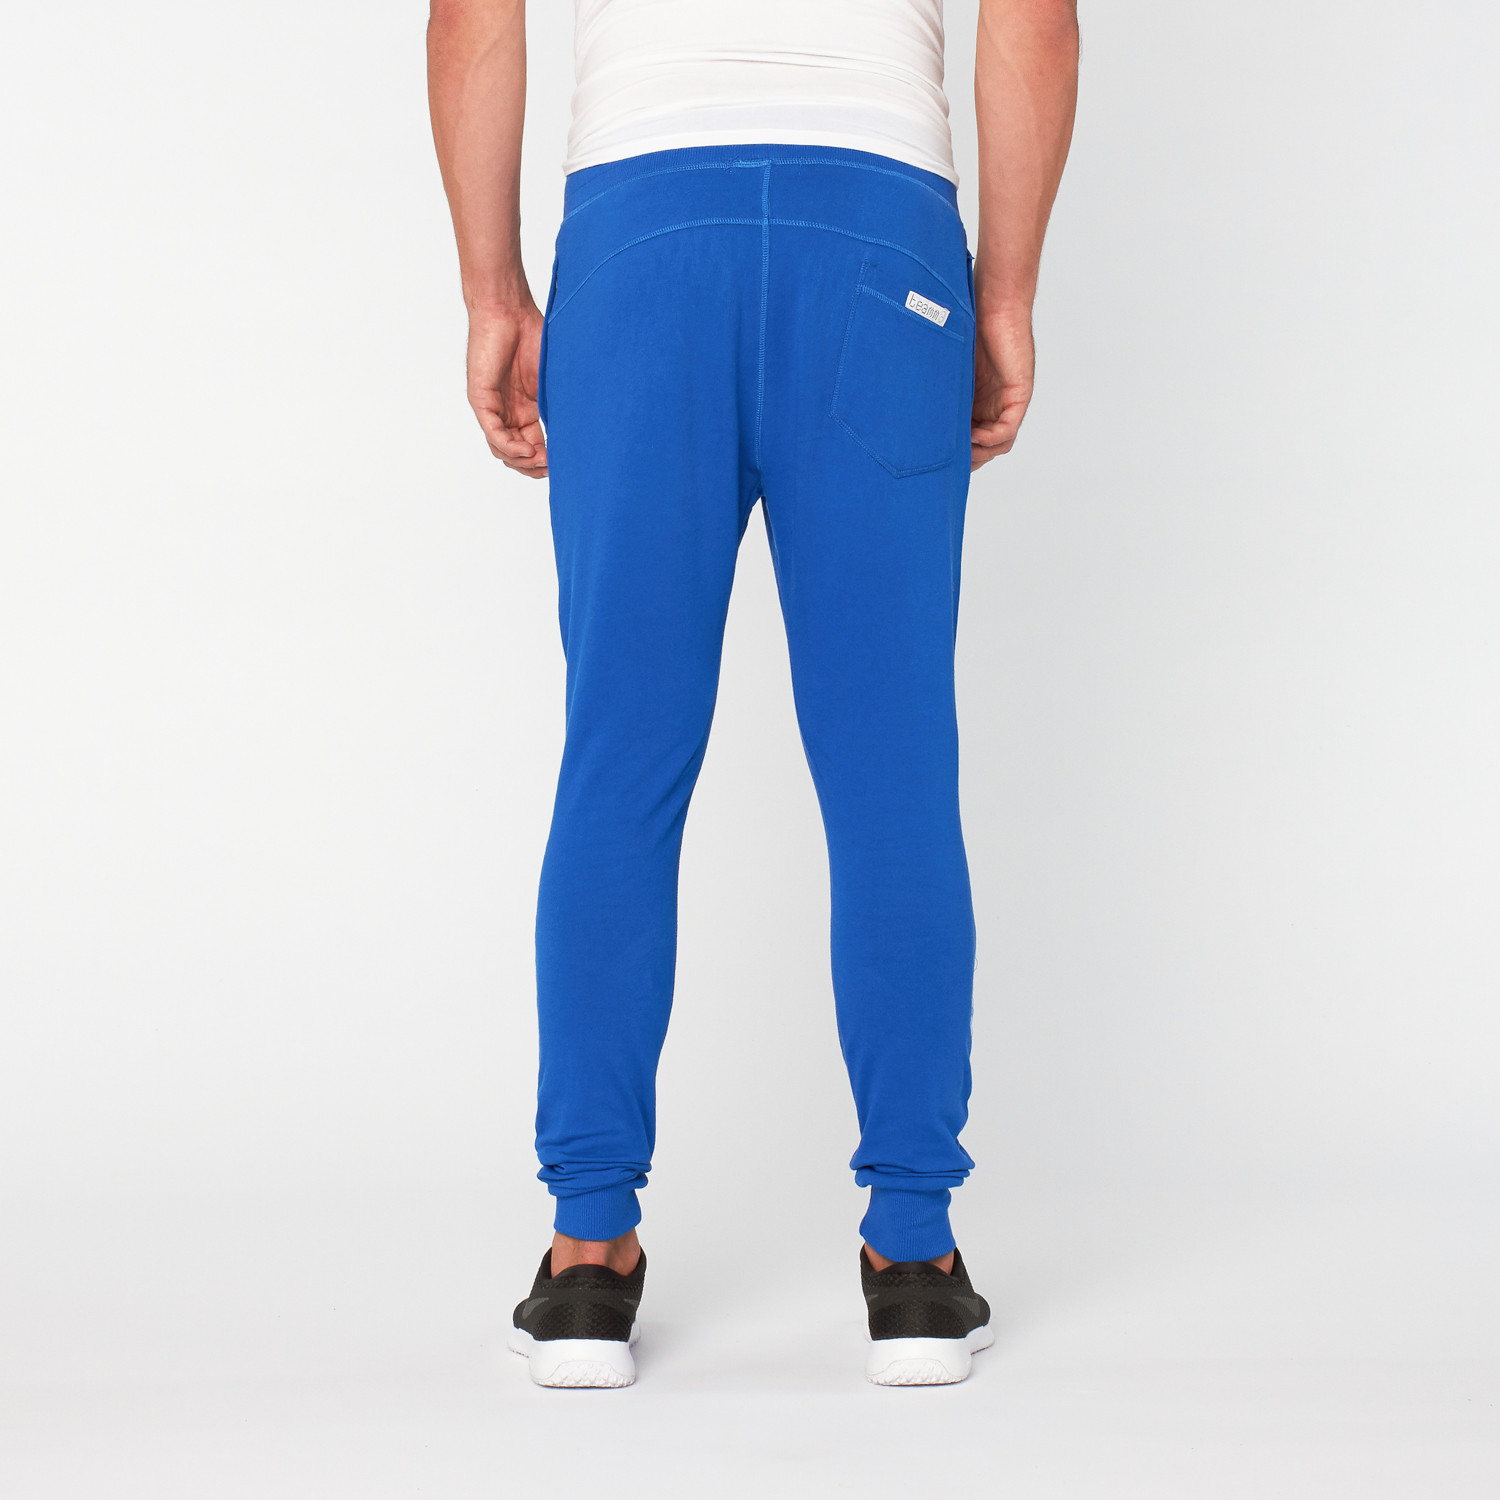 Teamm8 // Rider Sweat Pant // Brilliant Blue (XS) - Teamm8 - Touch of ...